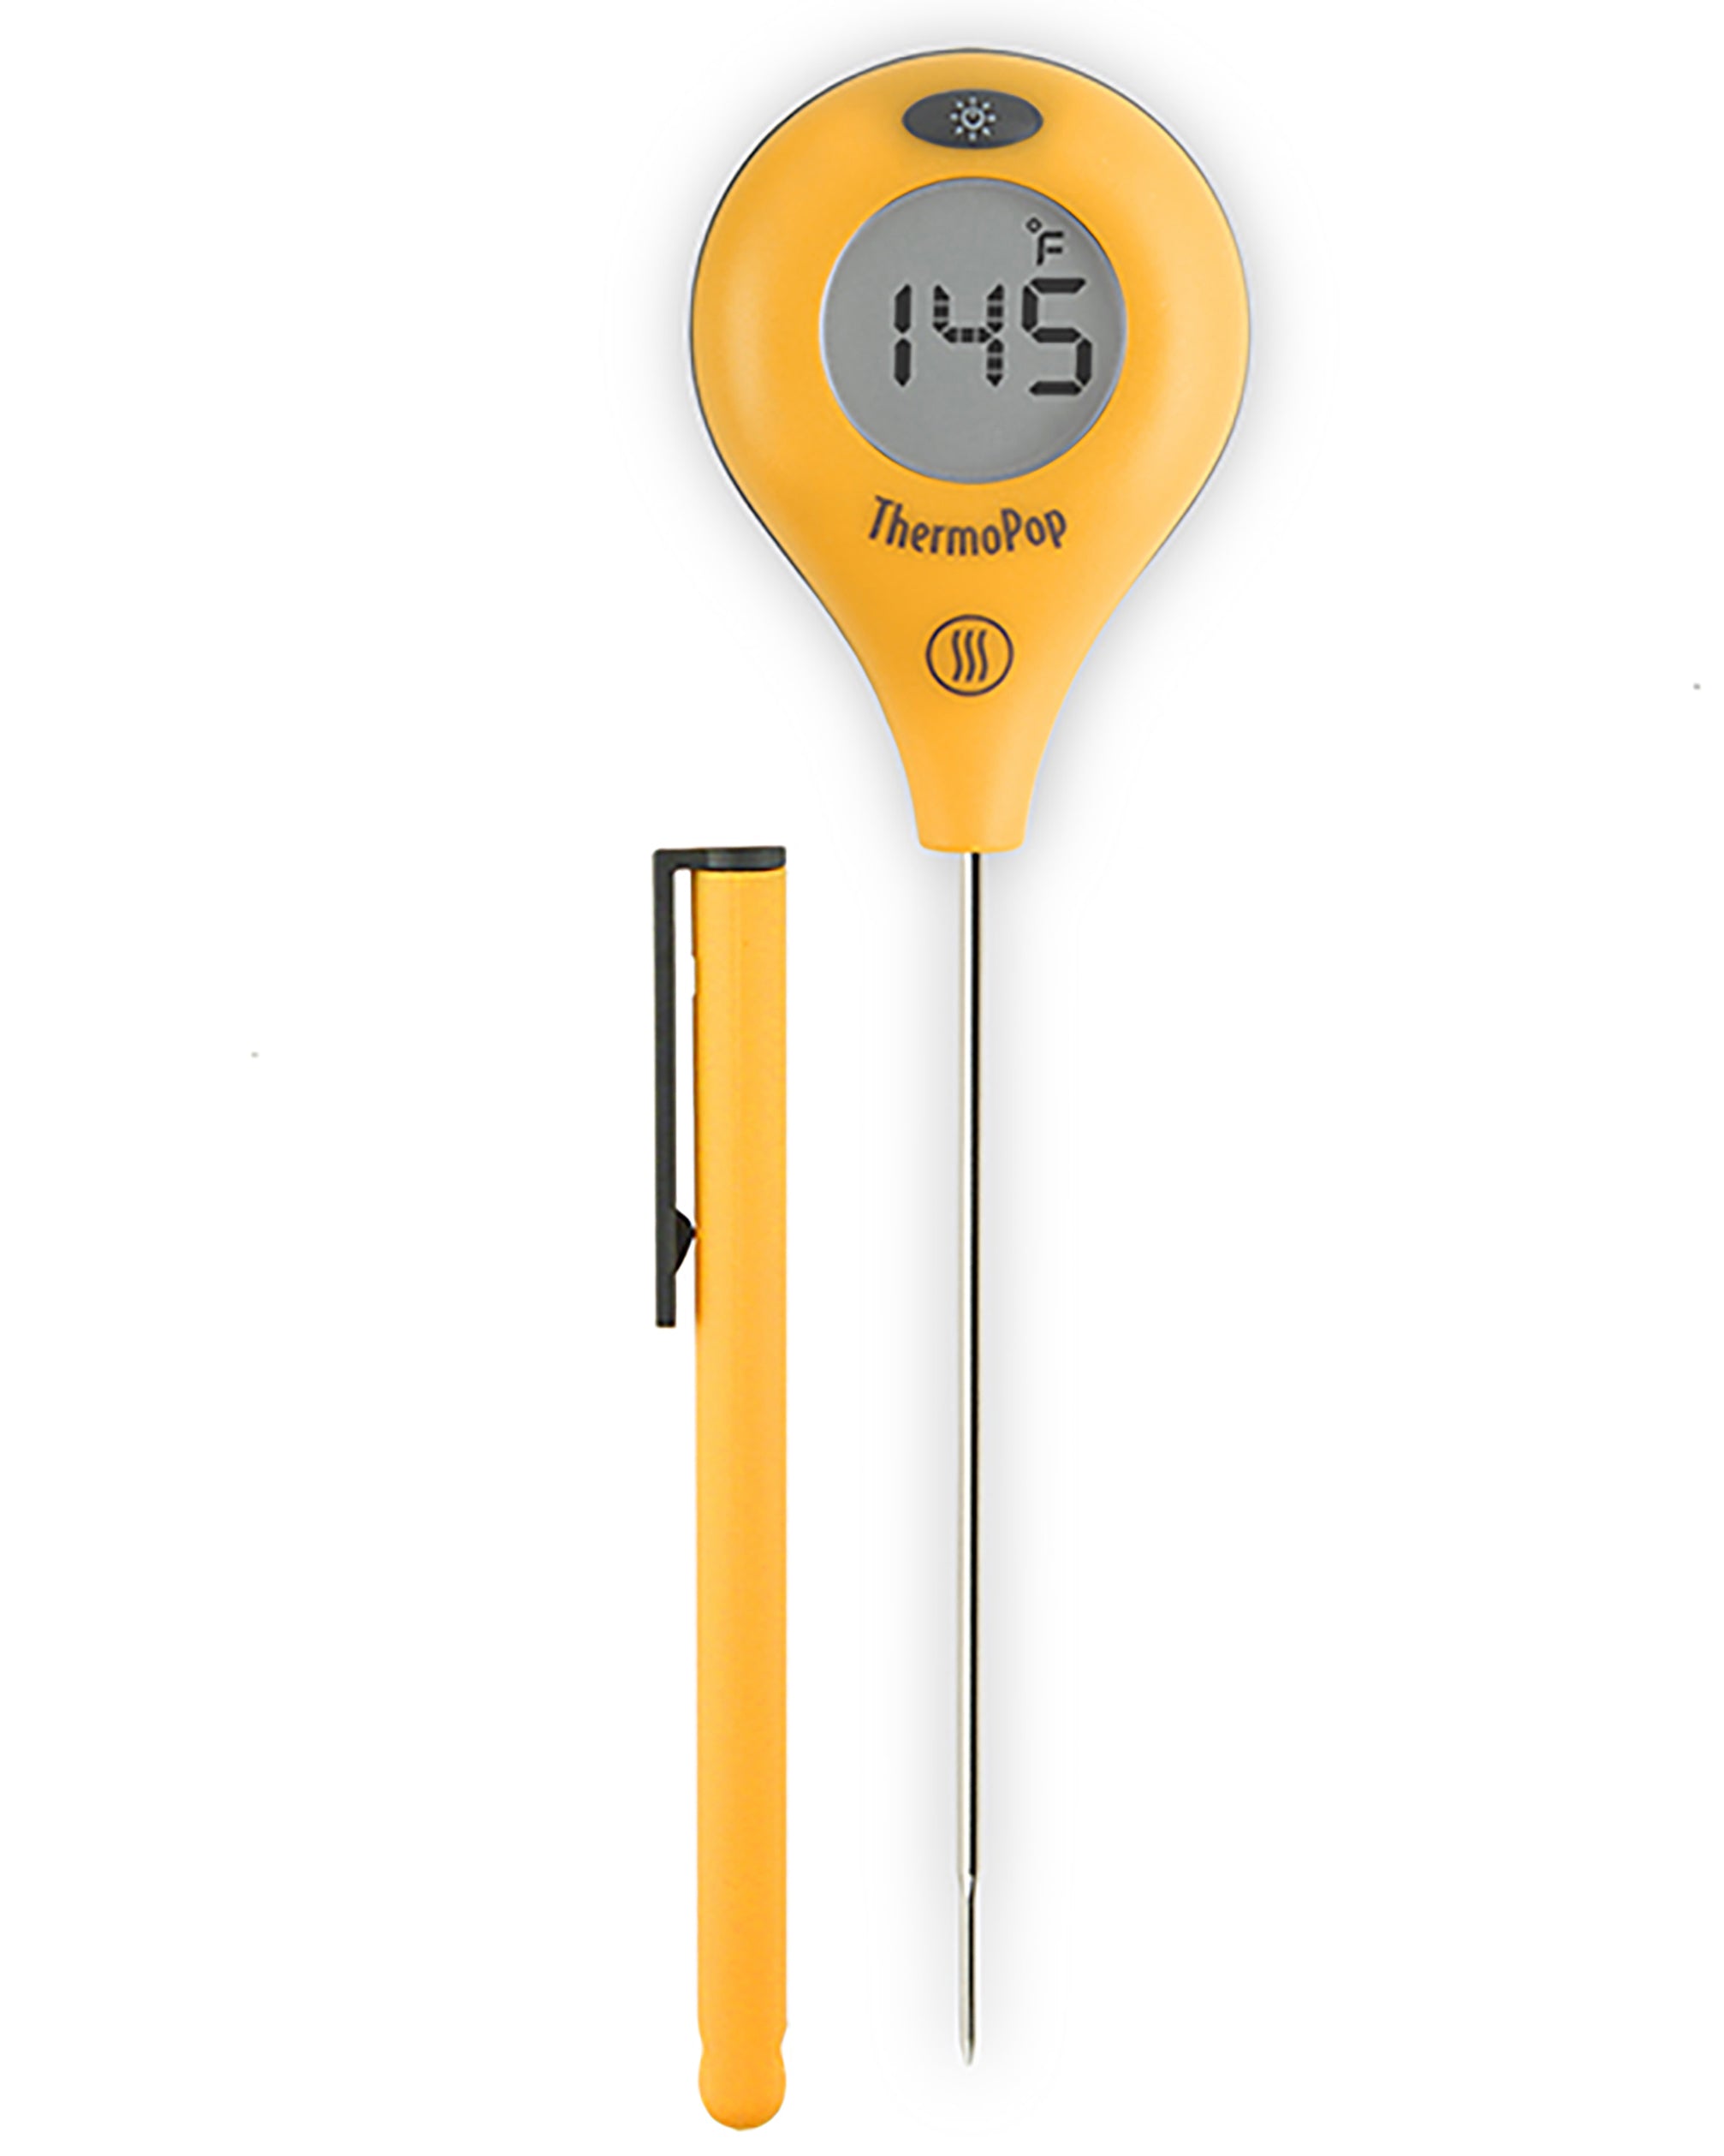 ThermoPop 2 Review: An Incredibly Useful Thermometer - Sizzle and Sear